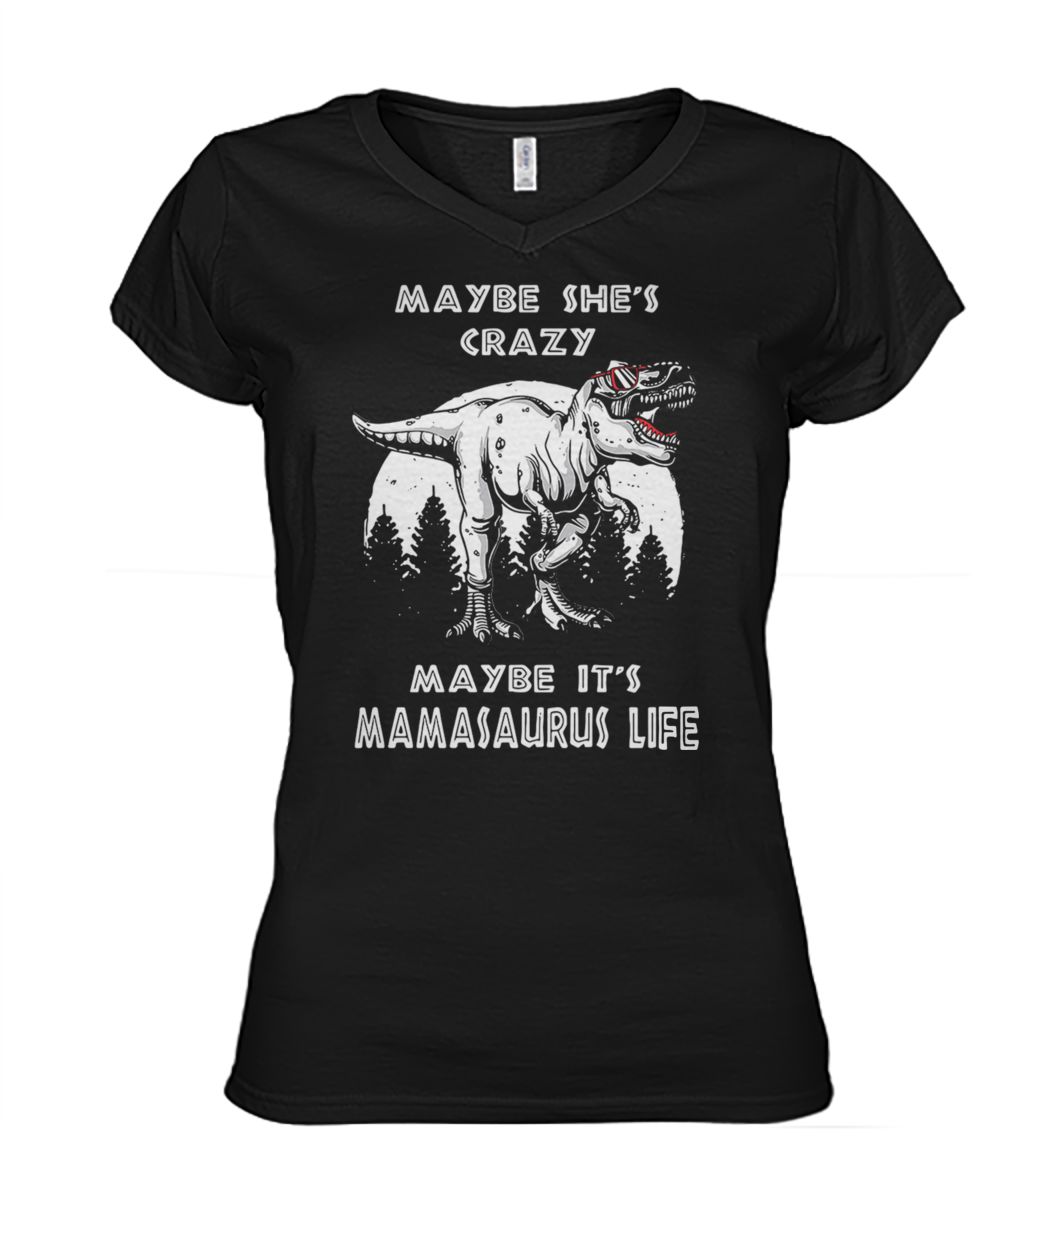 Maybe she's crazy maybe it's mamasaurus life women's v-neck